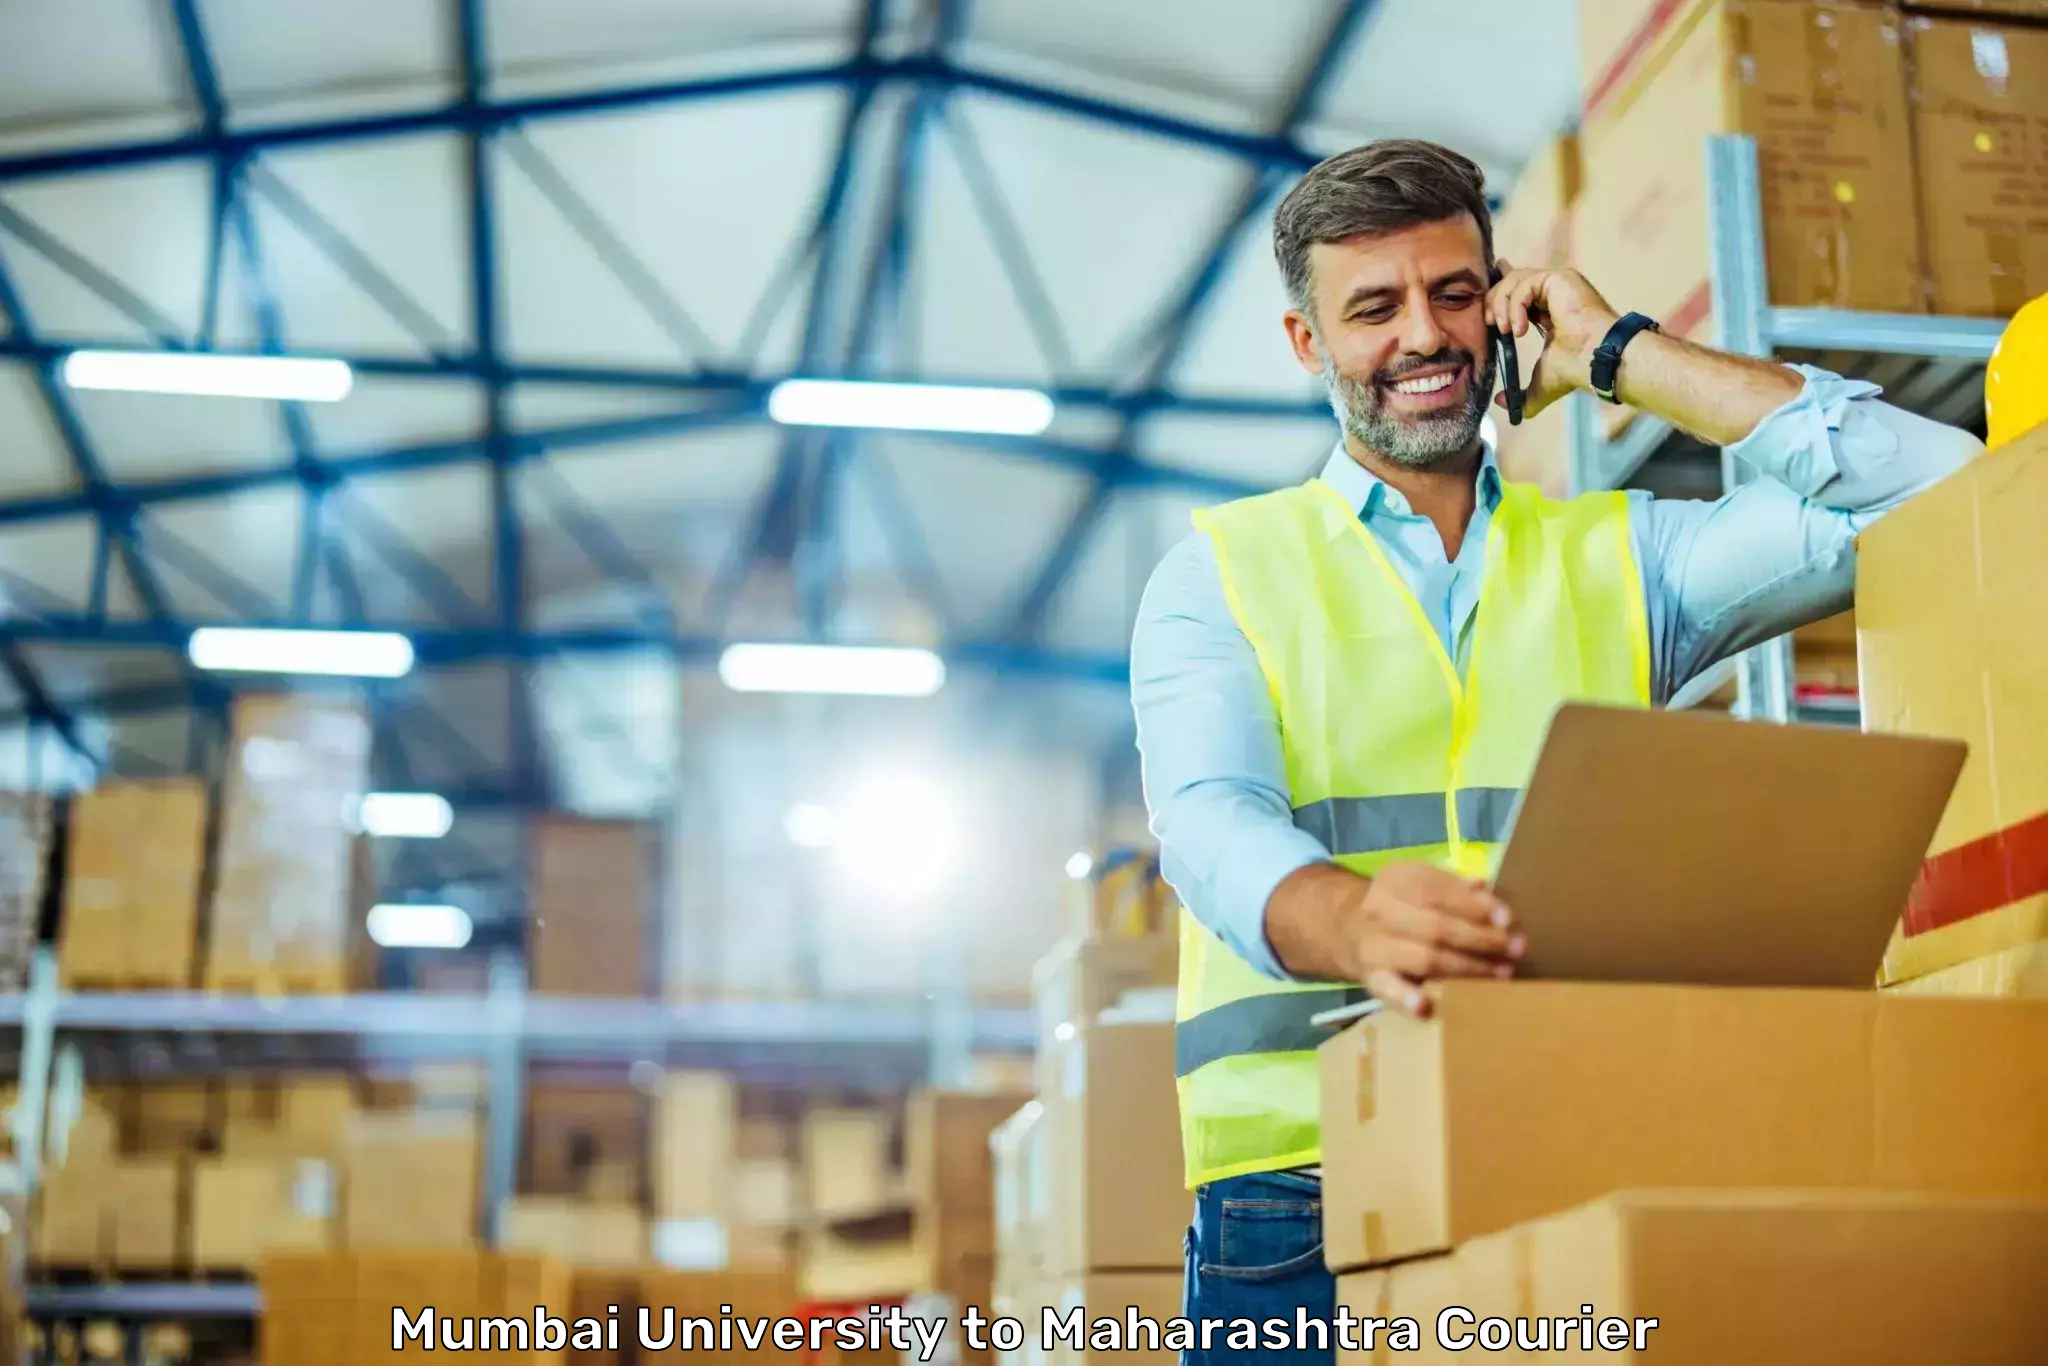 Fastest parcel delivery in Mumbai University to Jalna